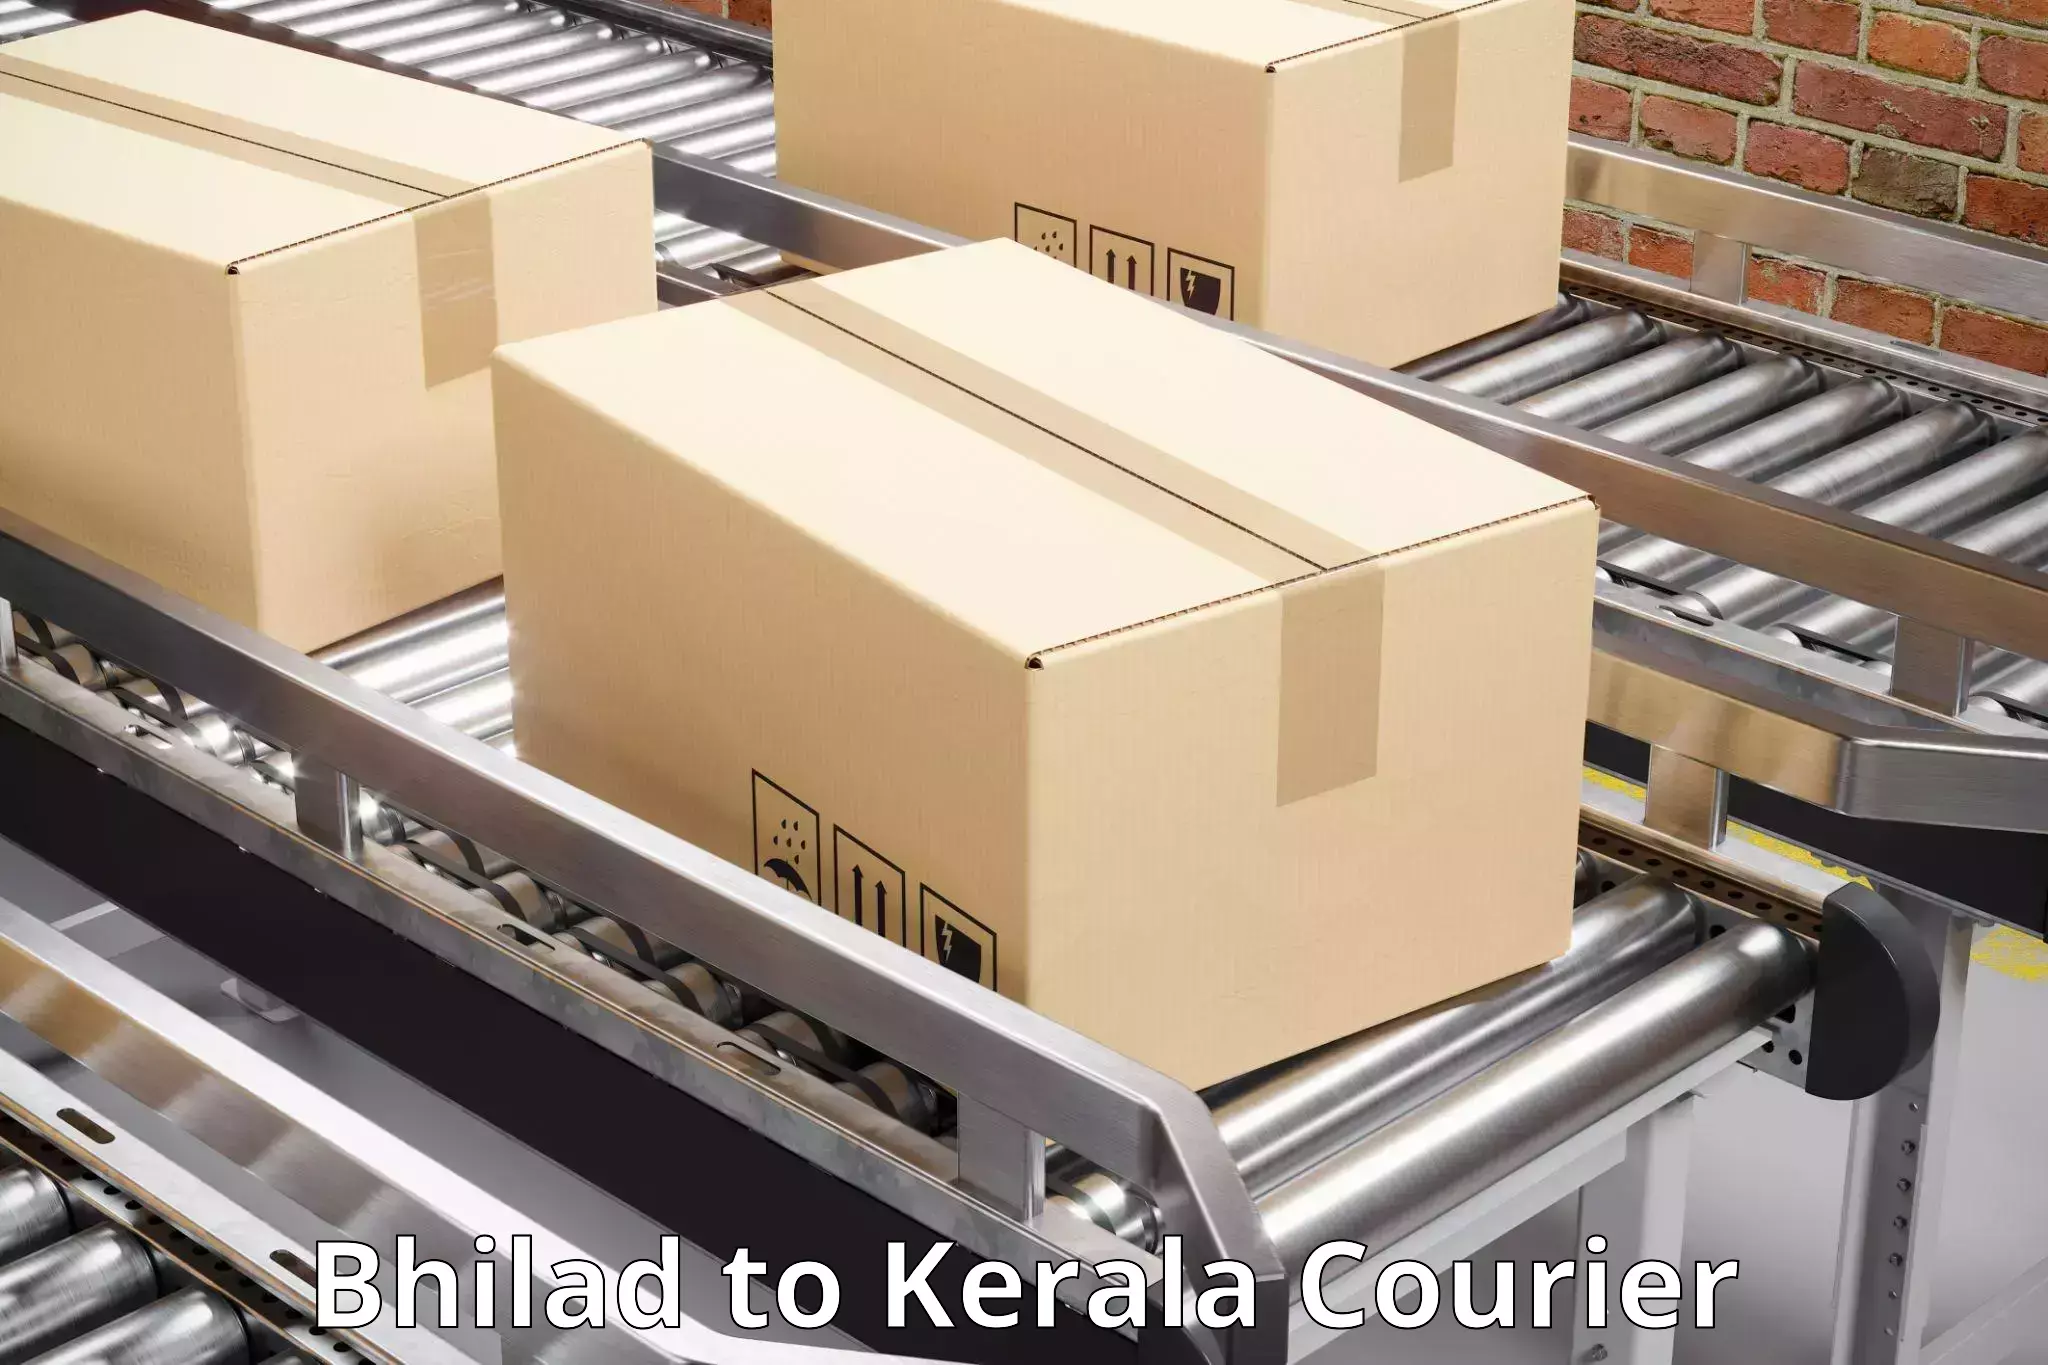 State-of-the-art courier technology Bhilad to Kannur